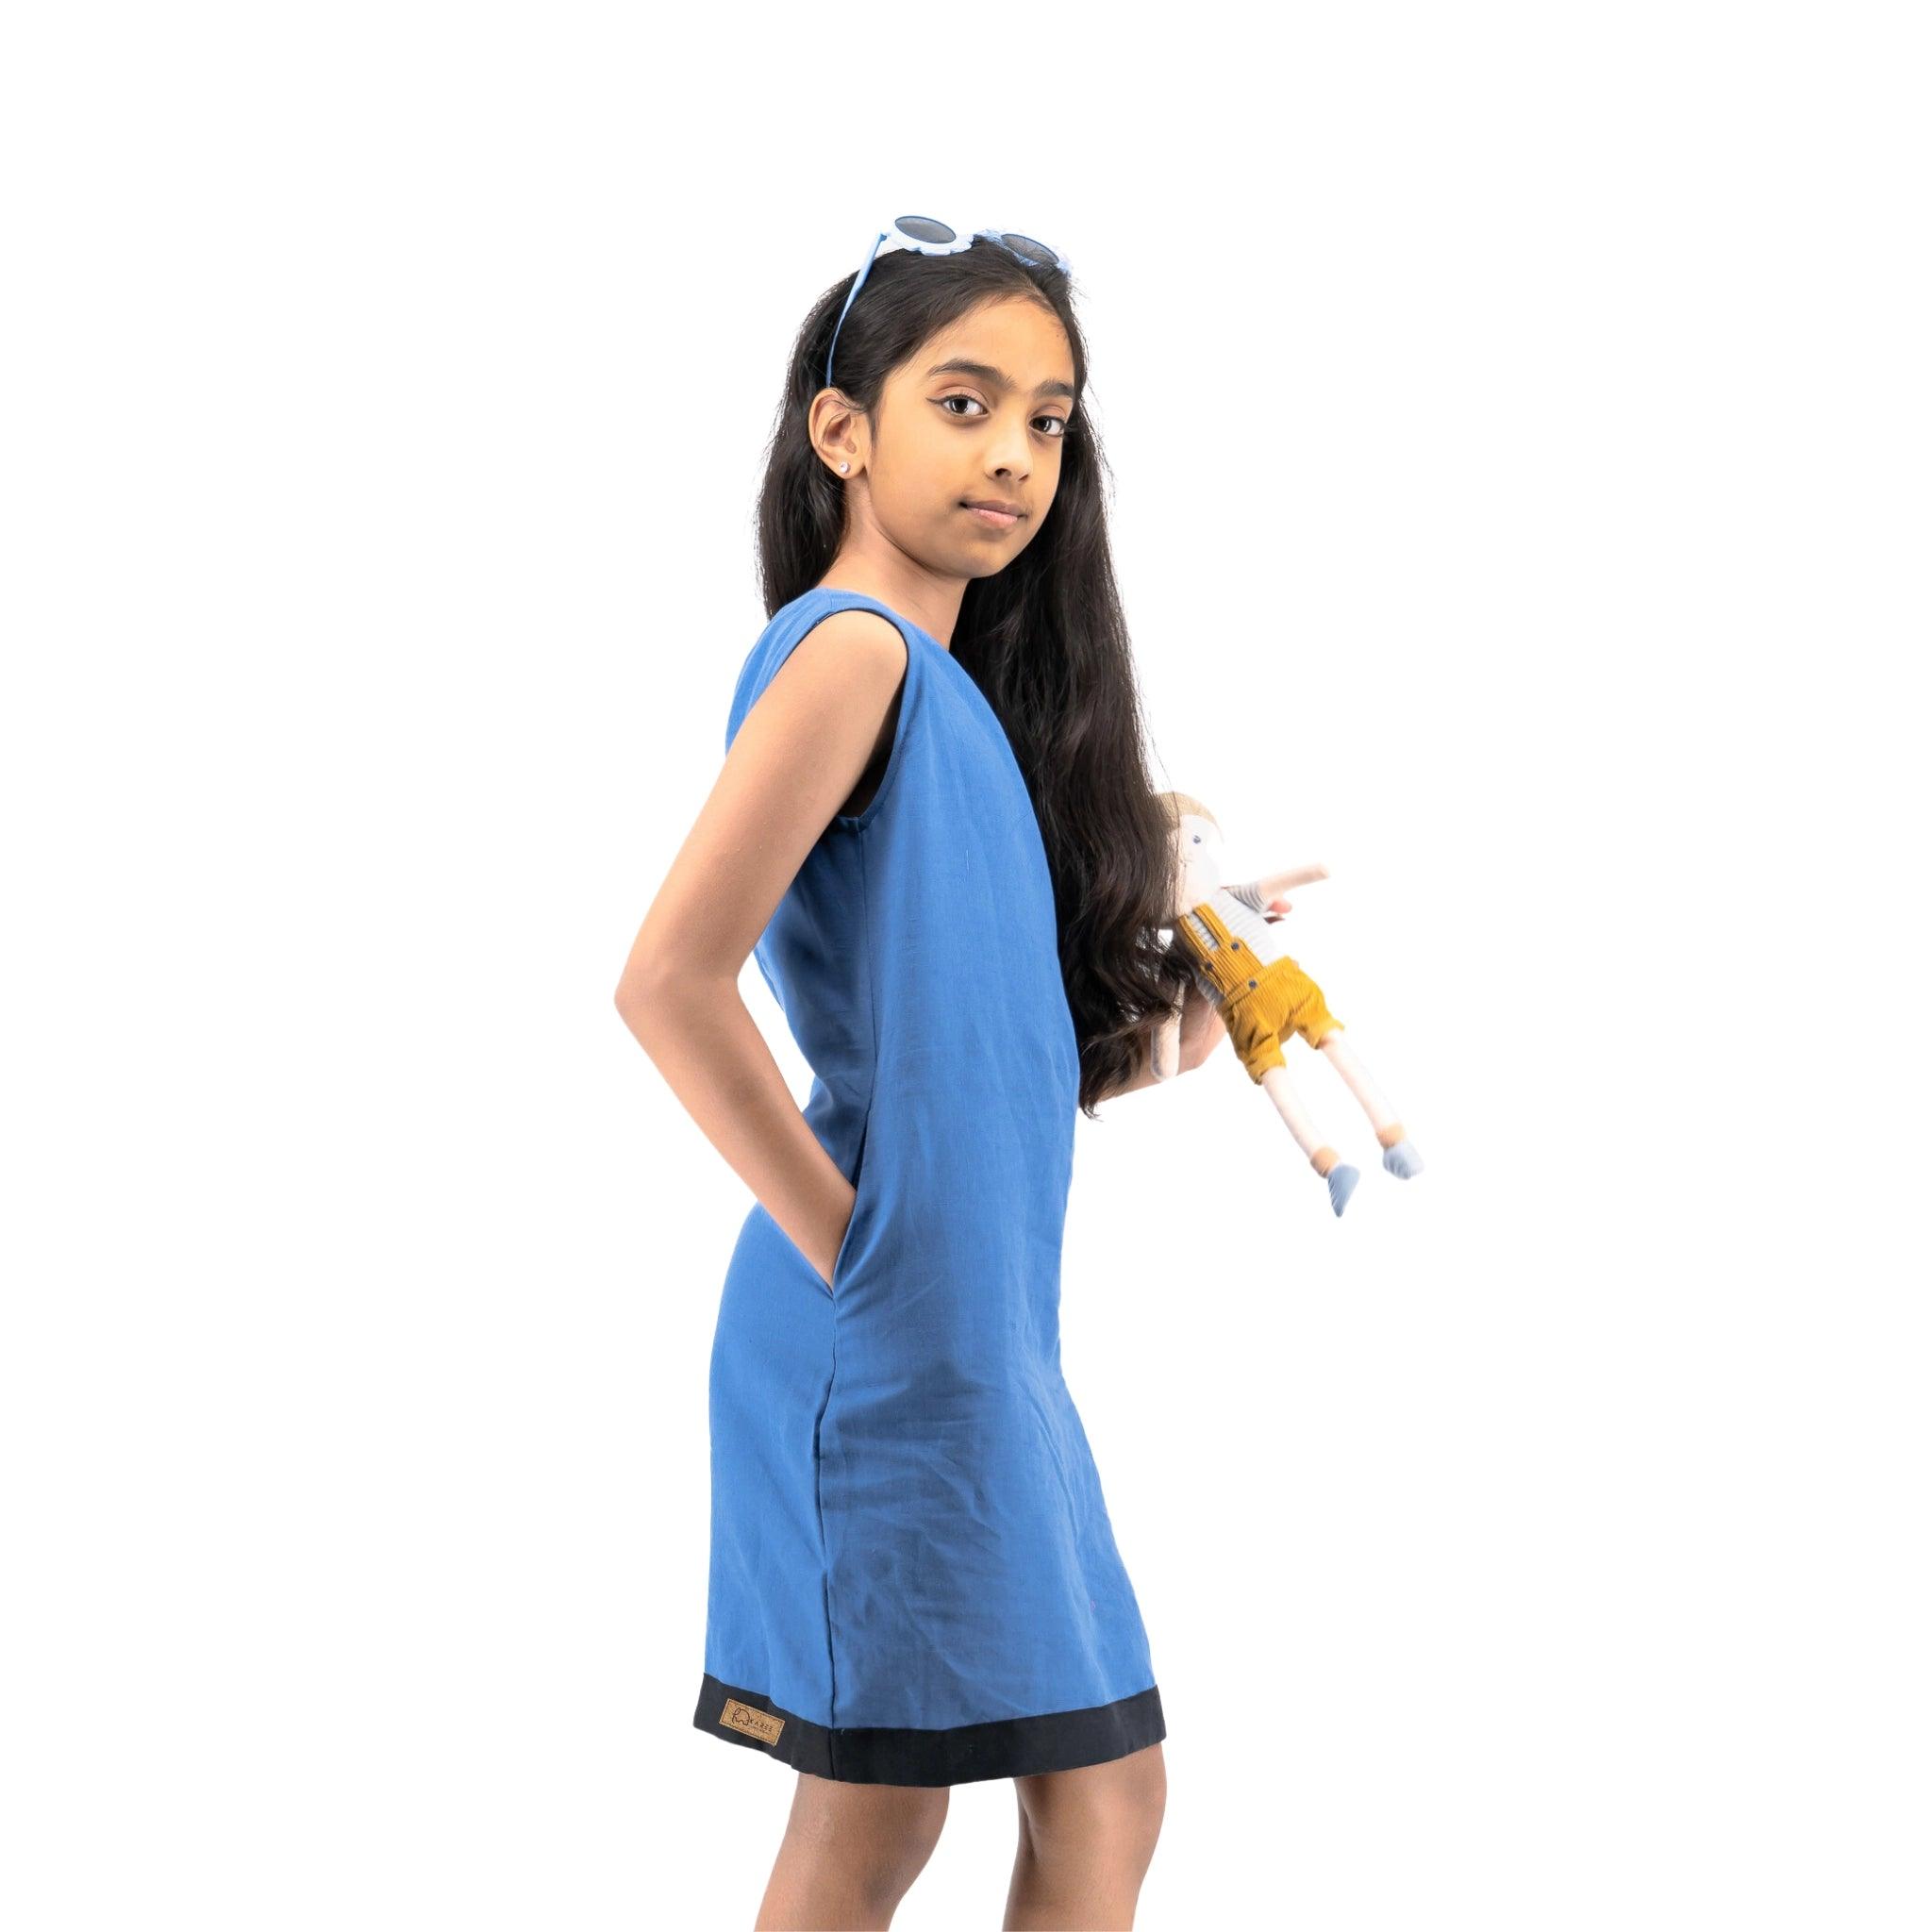 Young girl in a Karee blue Linen Cotton Round Neck Frock holding a toy airplane, wearing sunglasses on her head, standing against a white background.